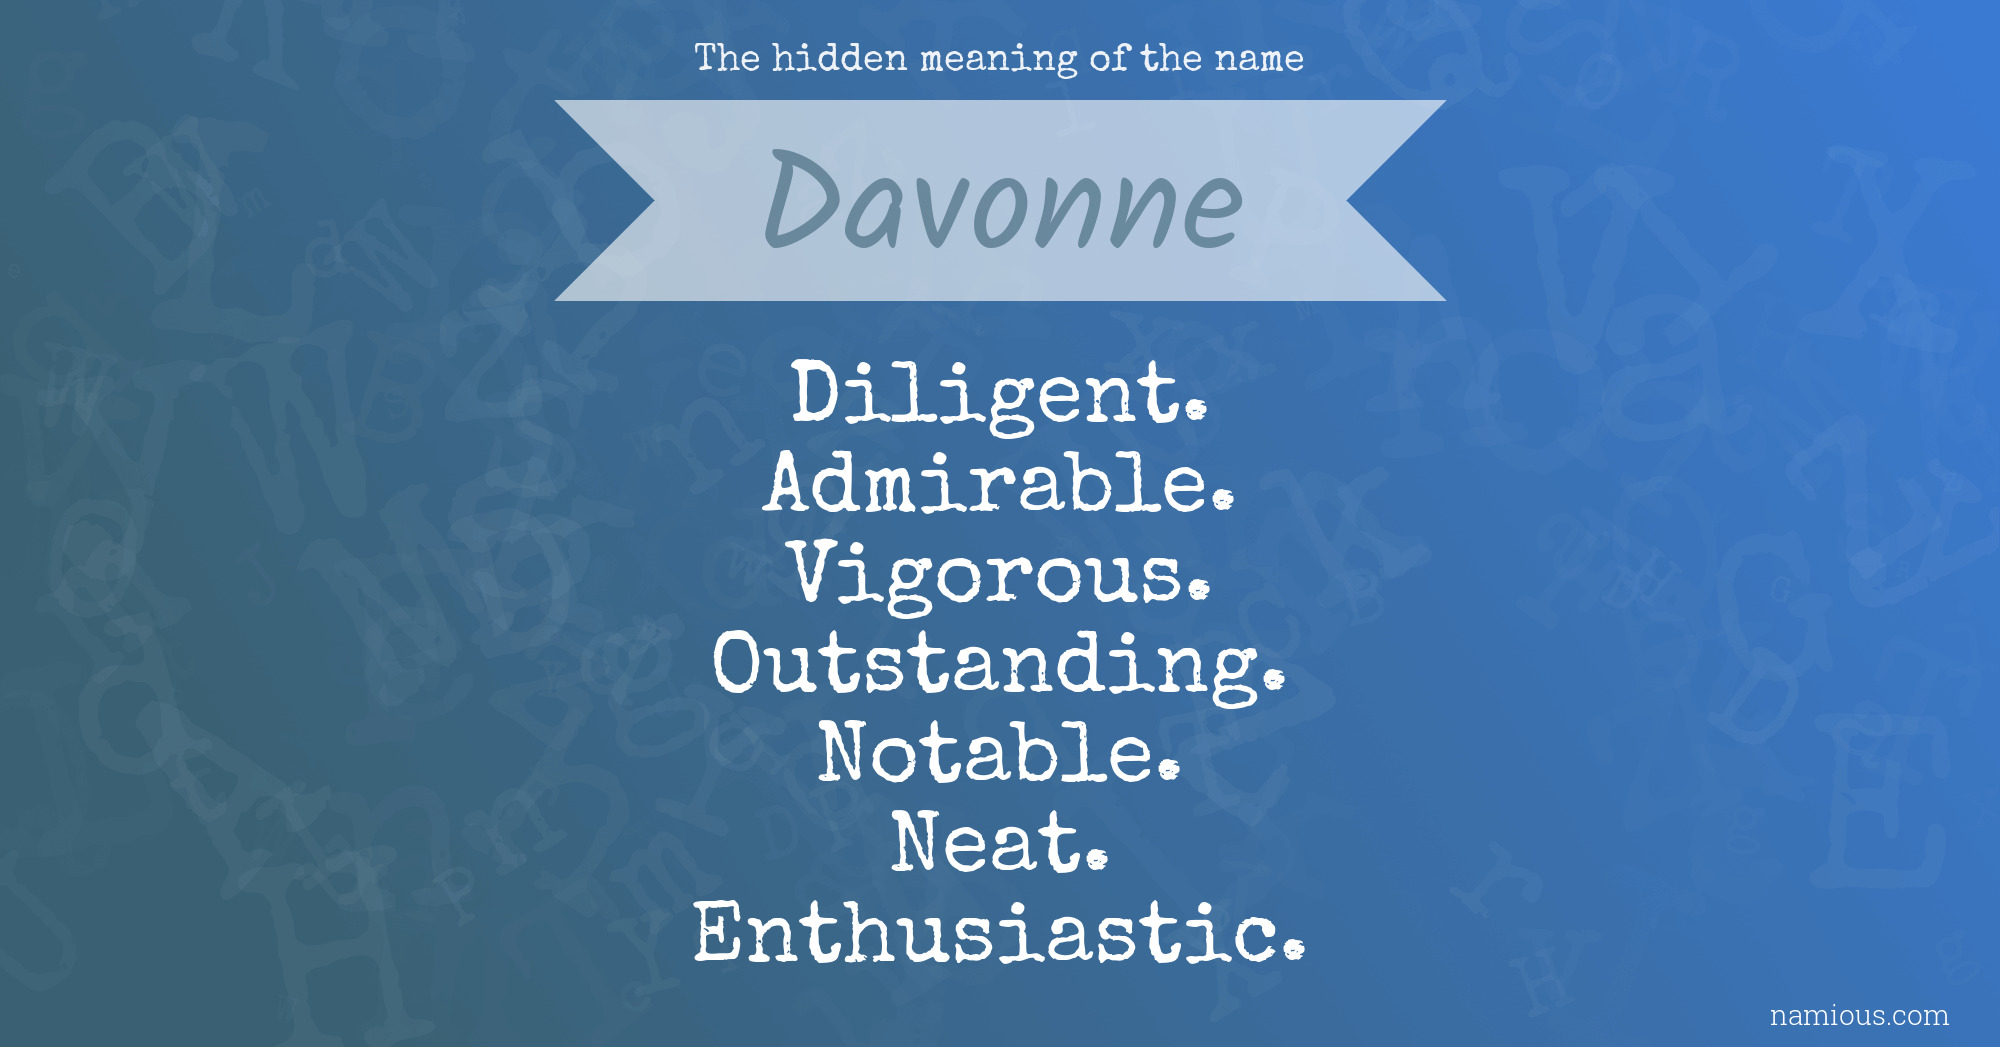 The hidden meaning of the name Davonne